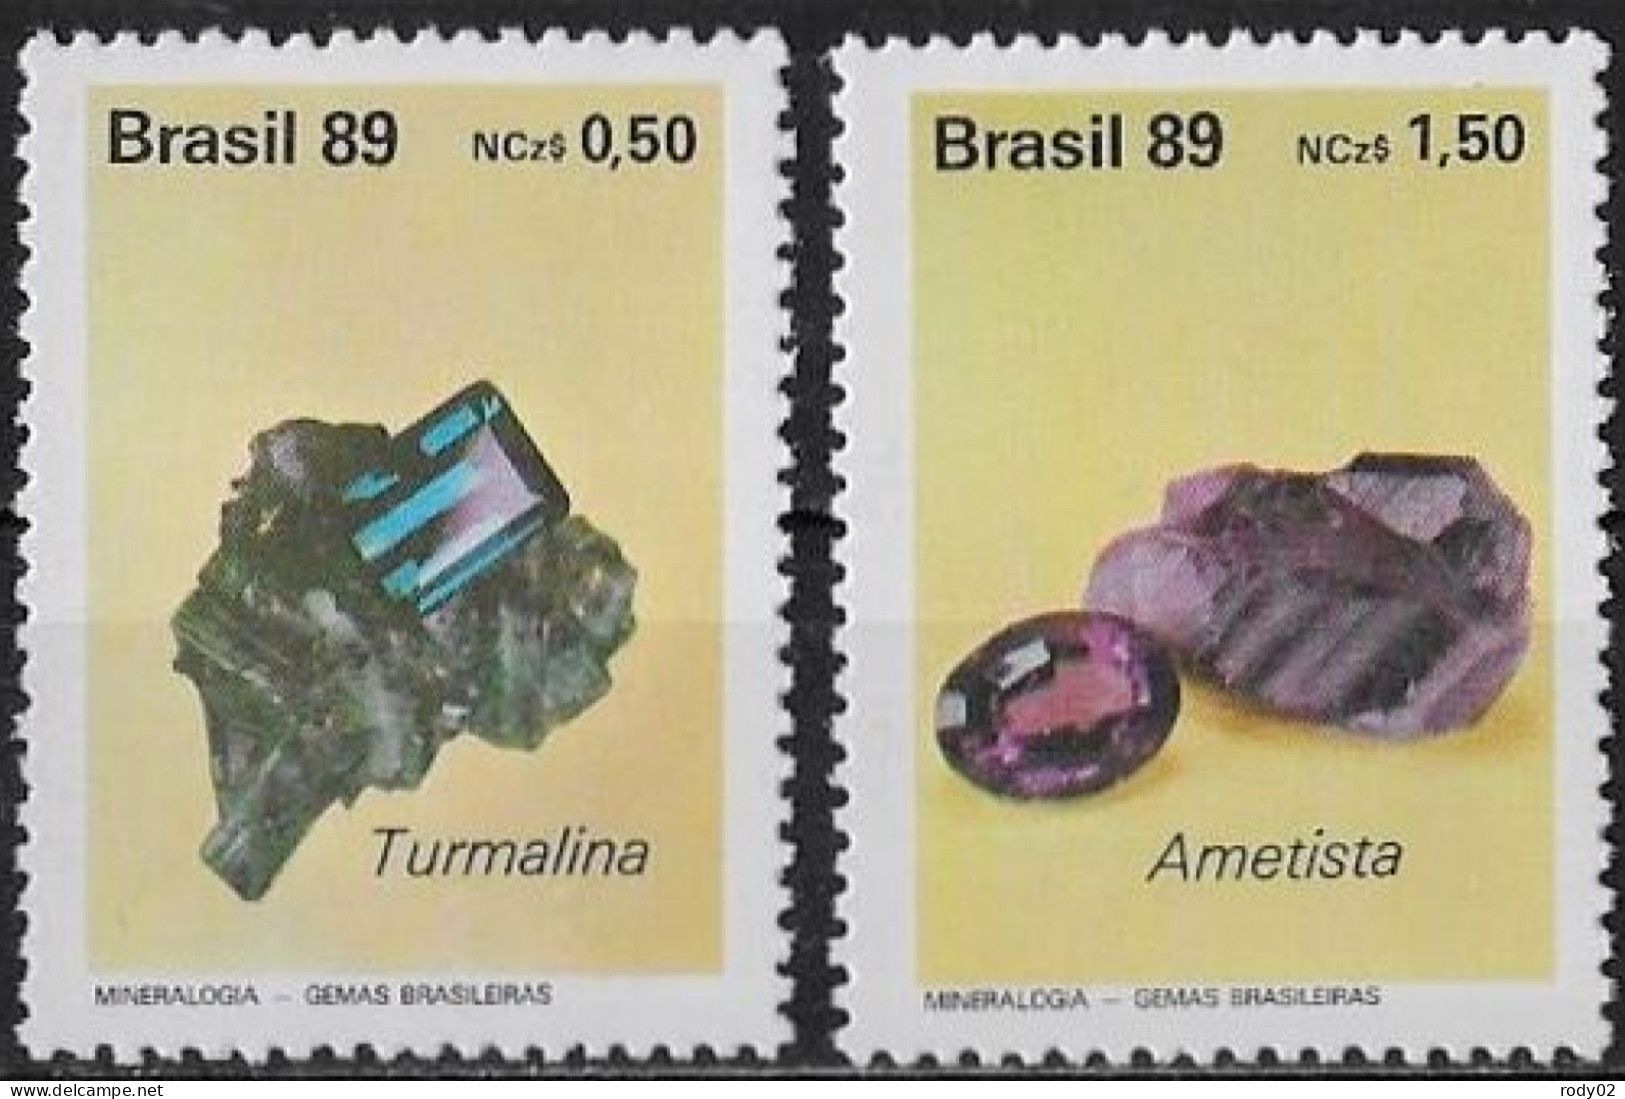 BRESIL - PIERRES PRECIEUSES - N° 1927 ET 1928 - NEUF** MNH - Minerals